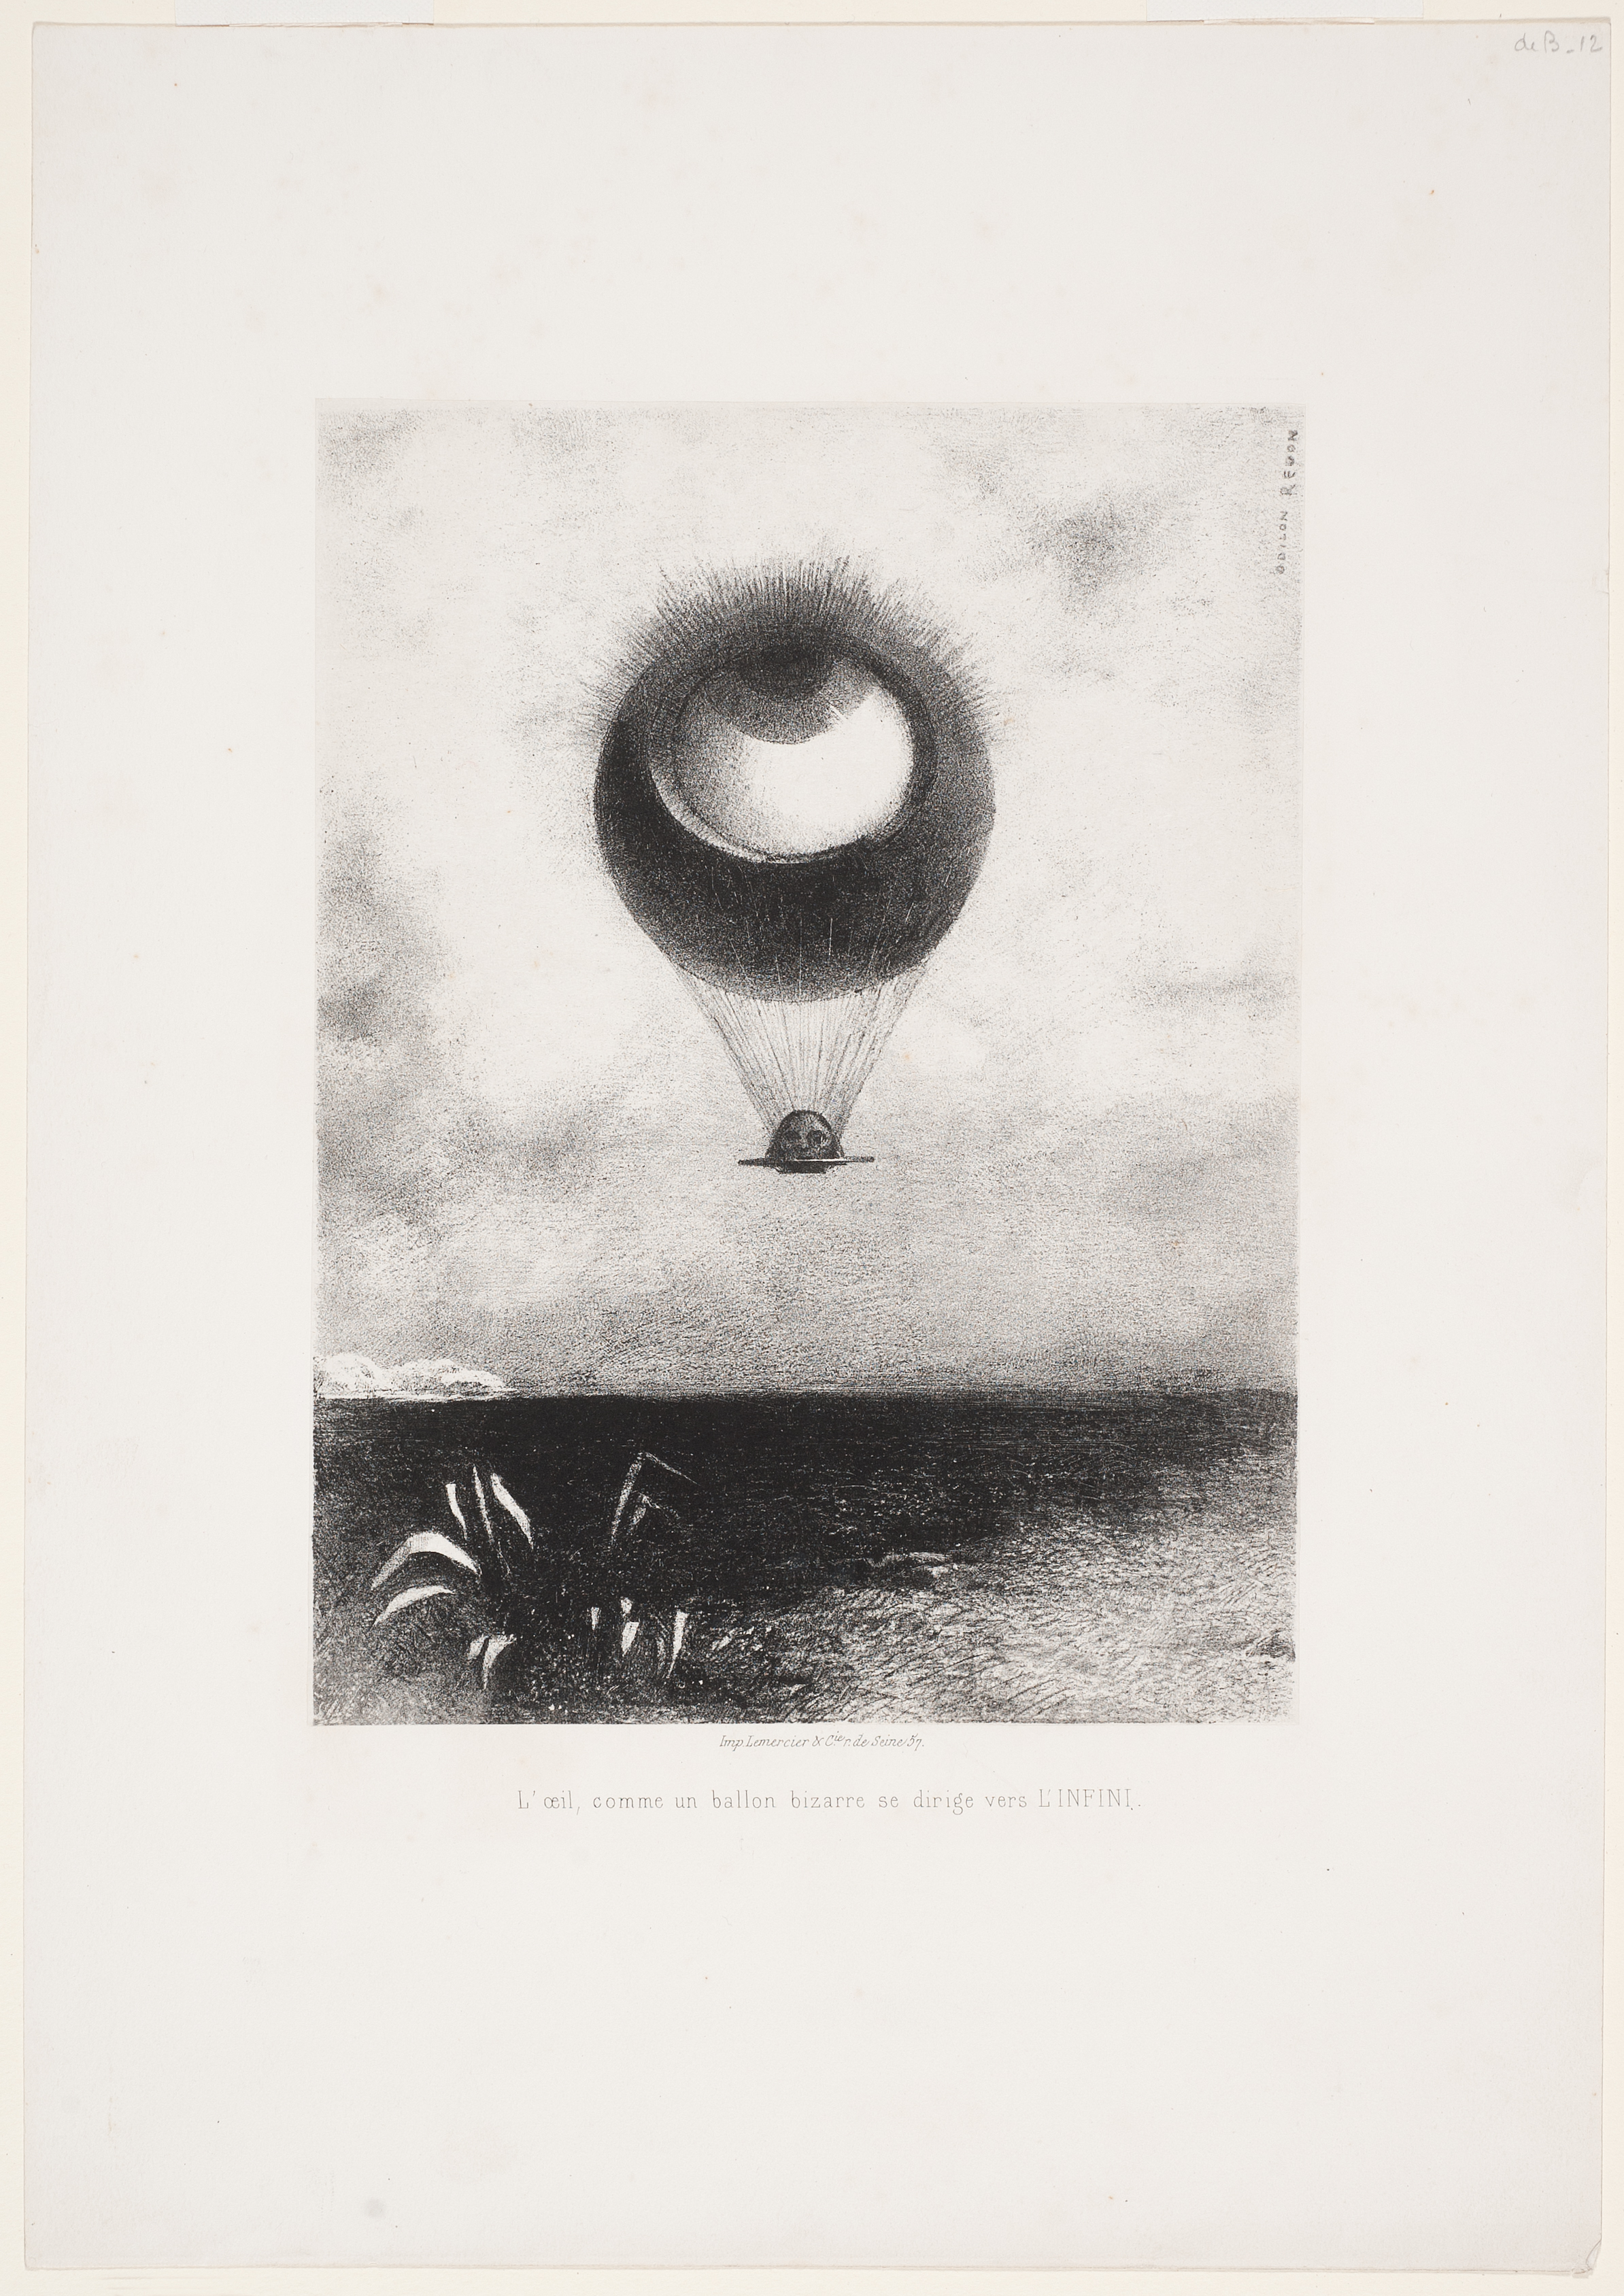 This monochromatic image depicts a hot air balloon in the sky that becomes a large eyeball floating over a landscape with a small plant in the foreground. A head is visible below the balloon.